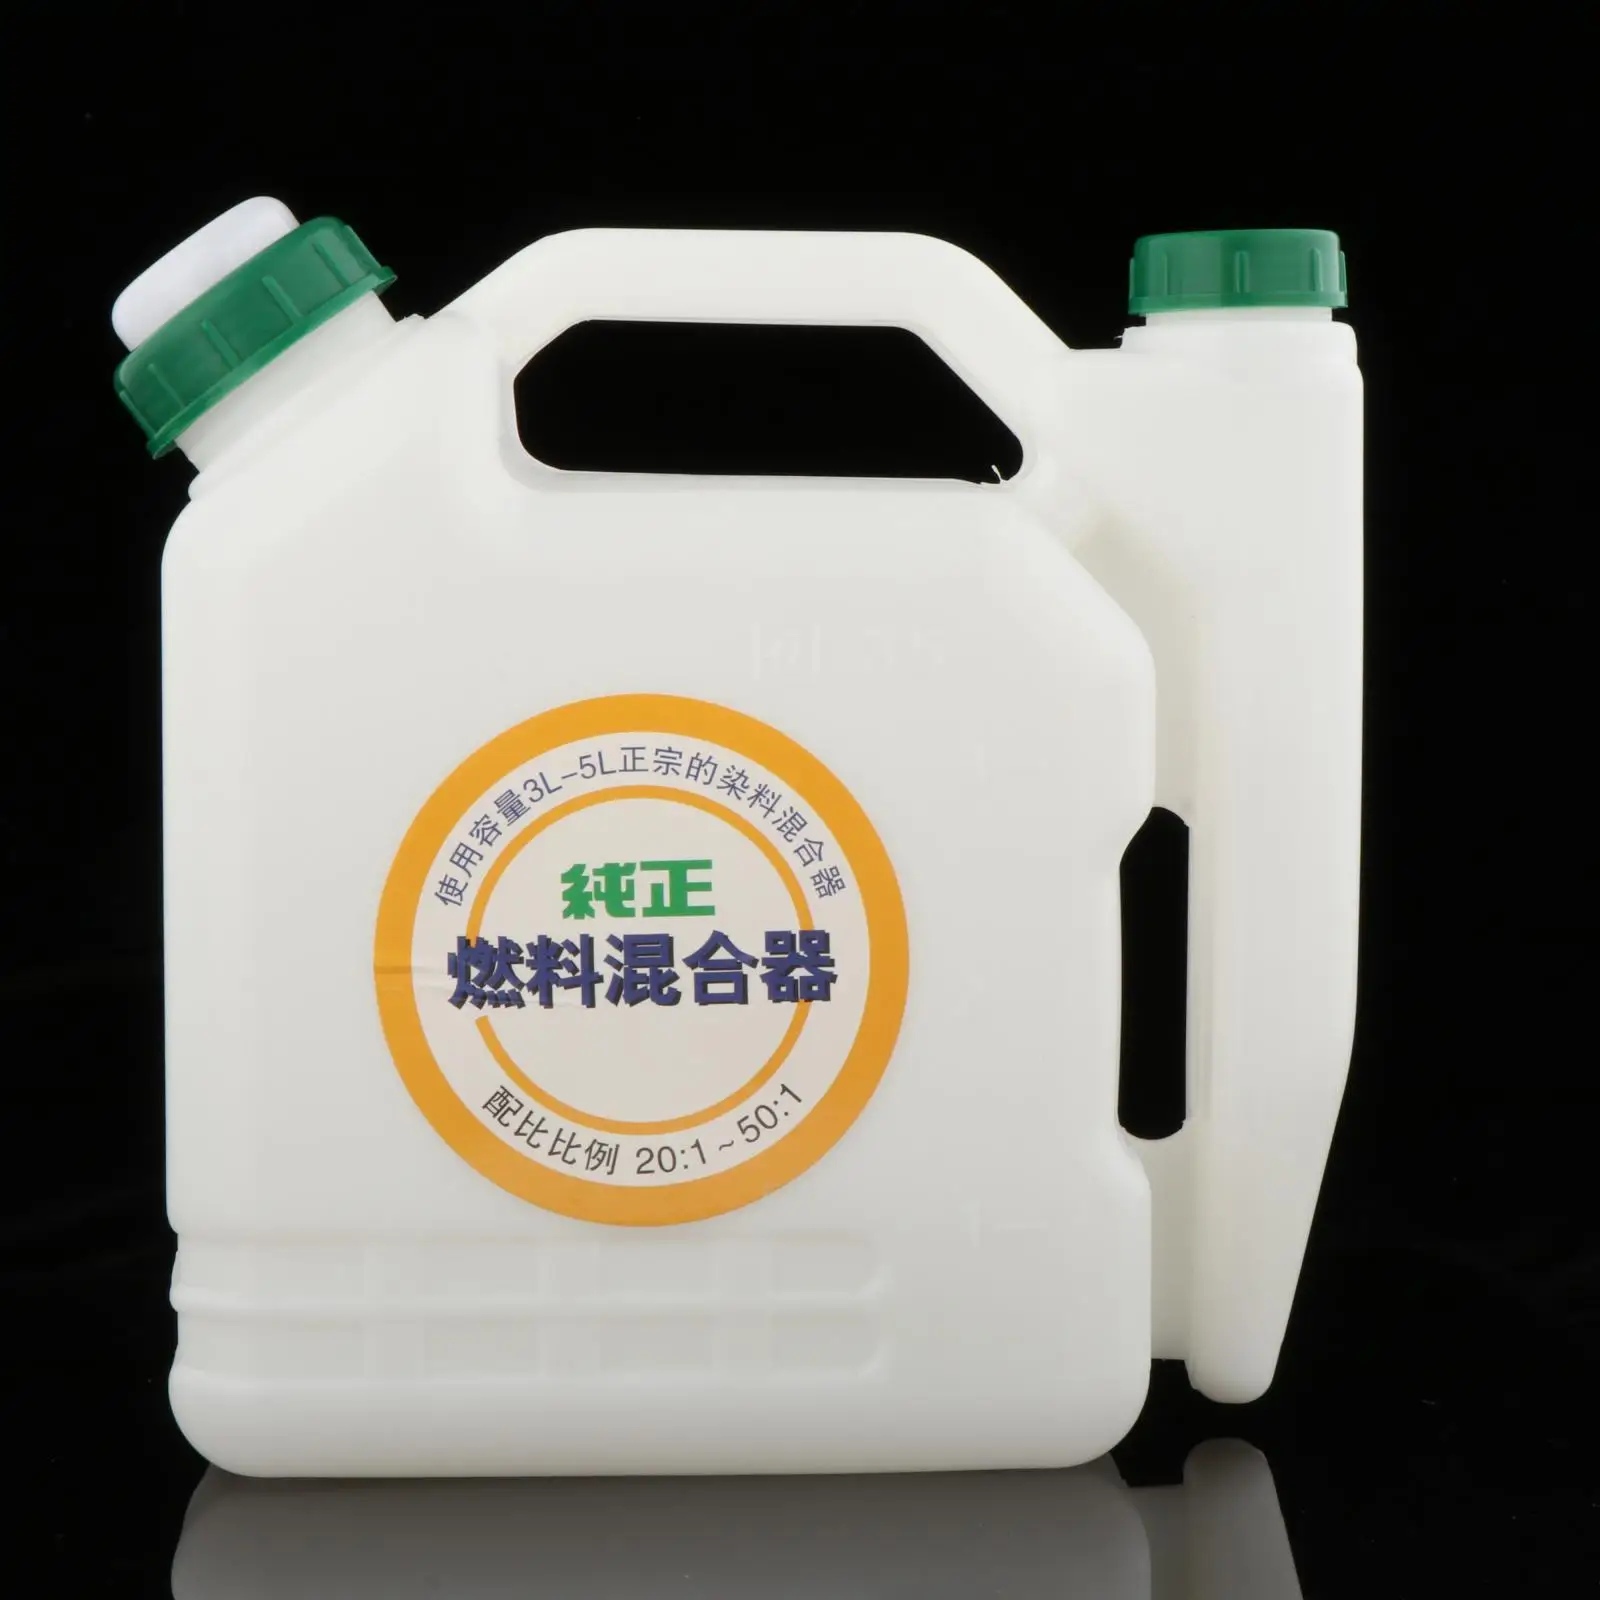 Universal   Gasoline Fuel Mixing Bottle 25:1/50:1/50:1/20:1 for Parts